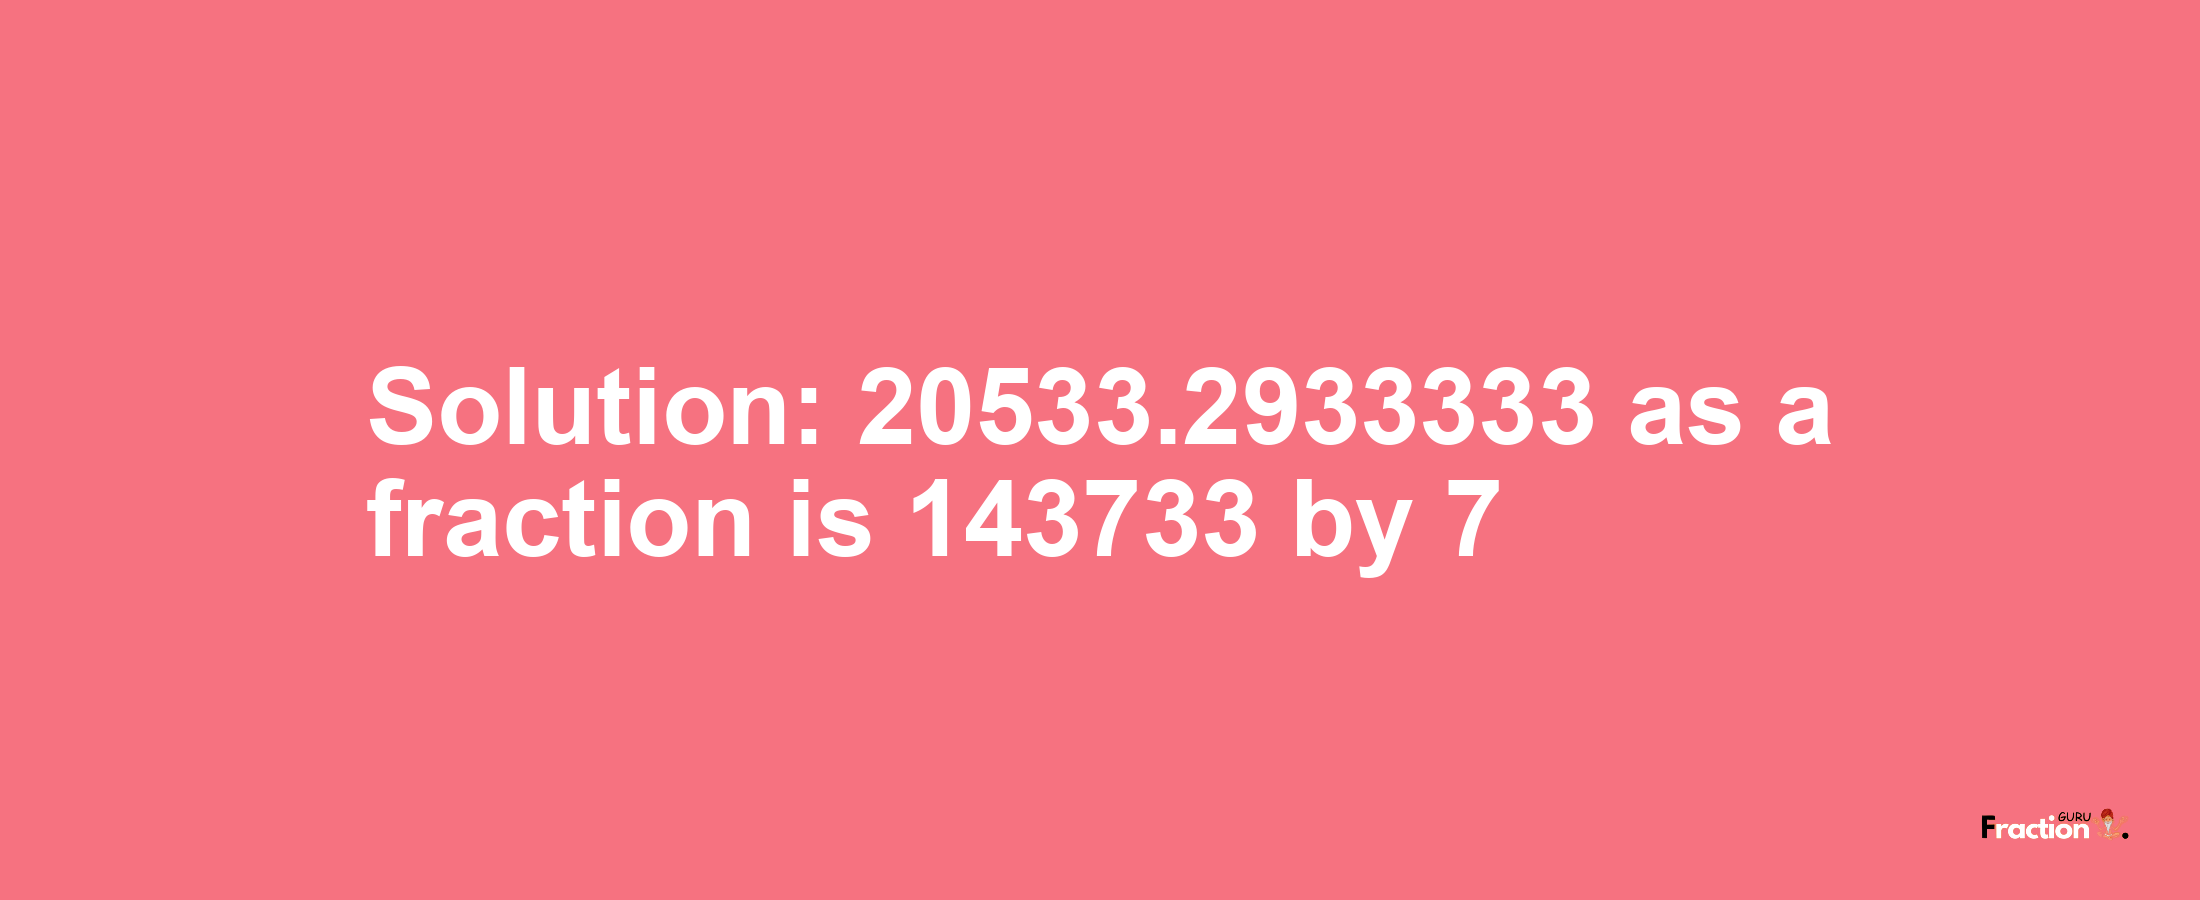 Solution:20533.2933333 as a fraction is 143733/7